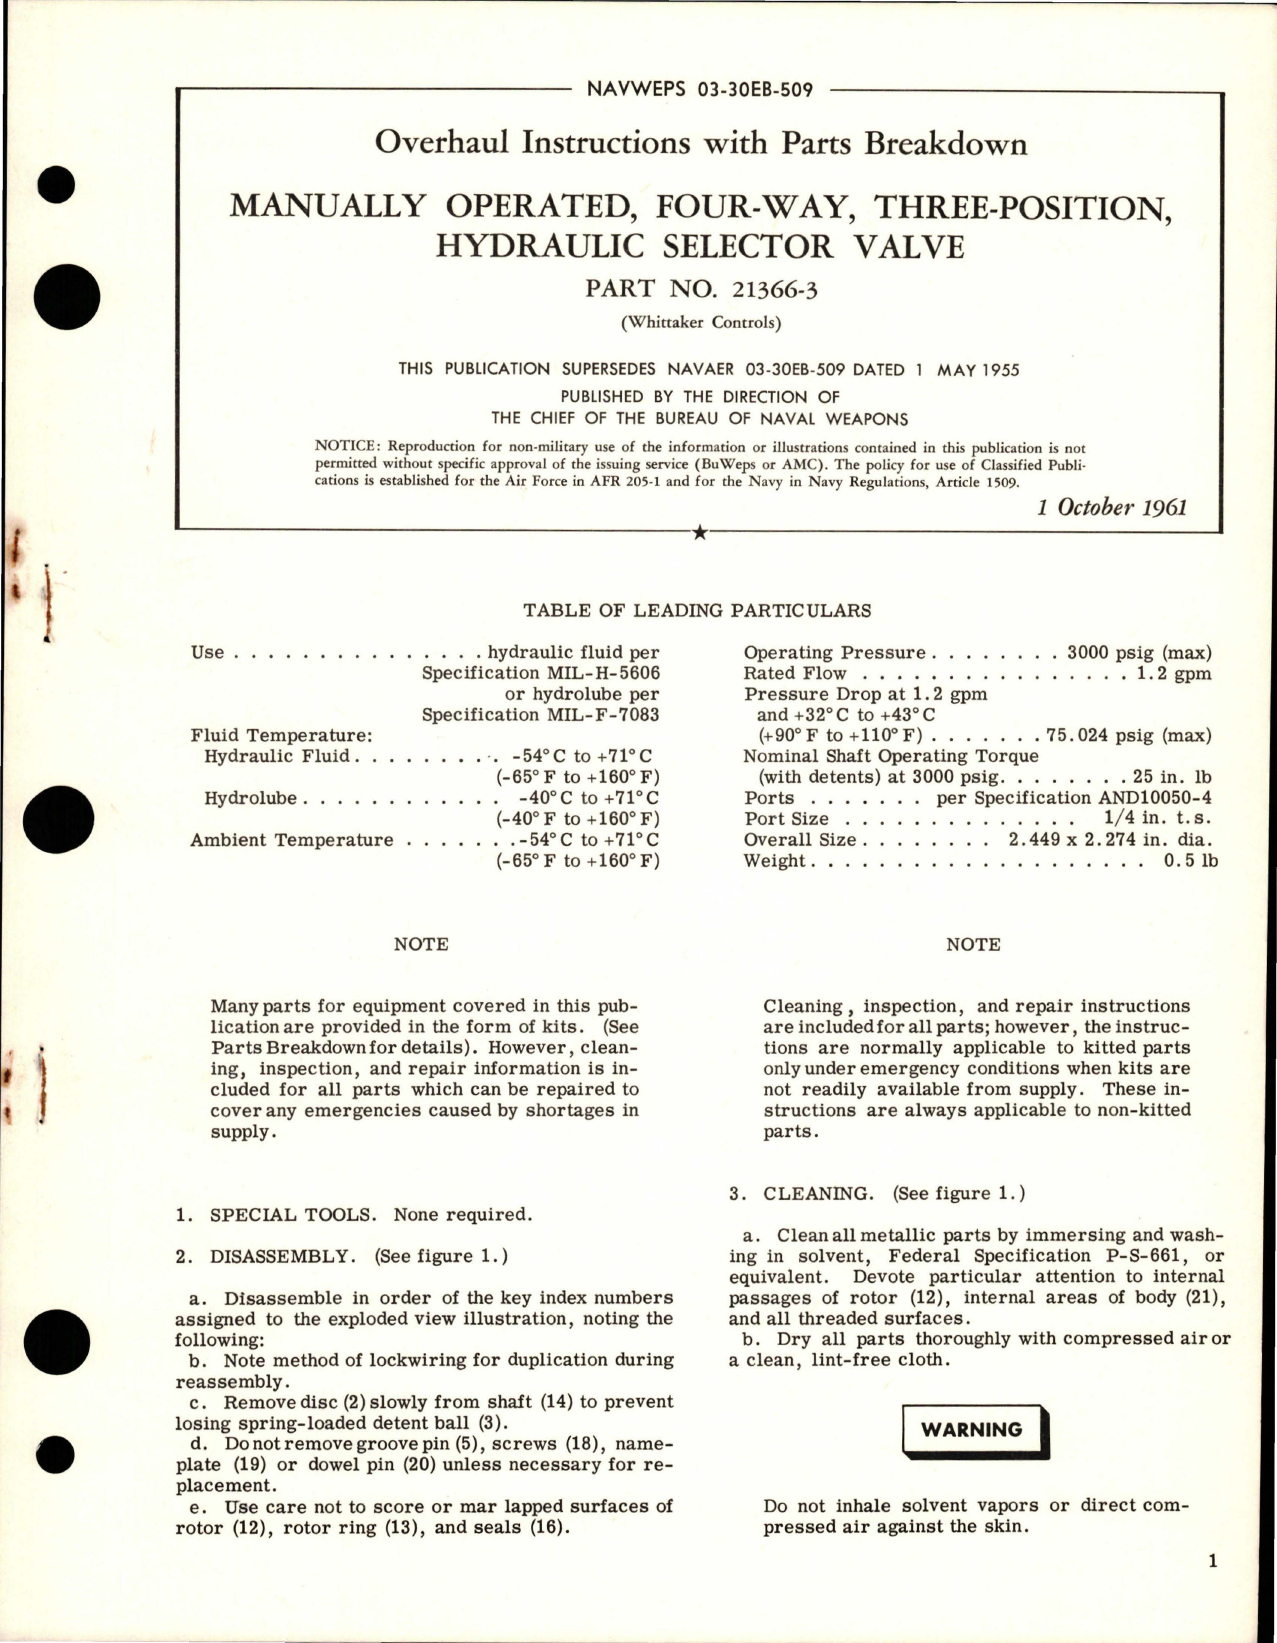 Sample page 1 from AirCorps Library document: Overhaul Instructions with Parts for Manually Operated -  Four-Way - Three Position - Hydraulic Selector Valve - Part 21366-3